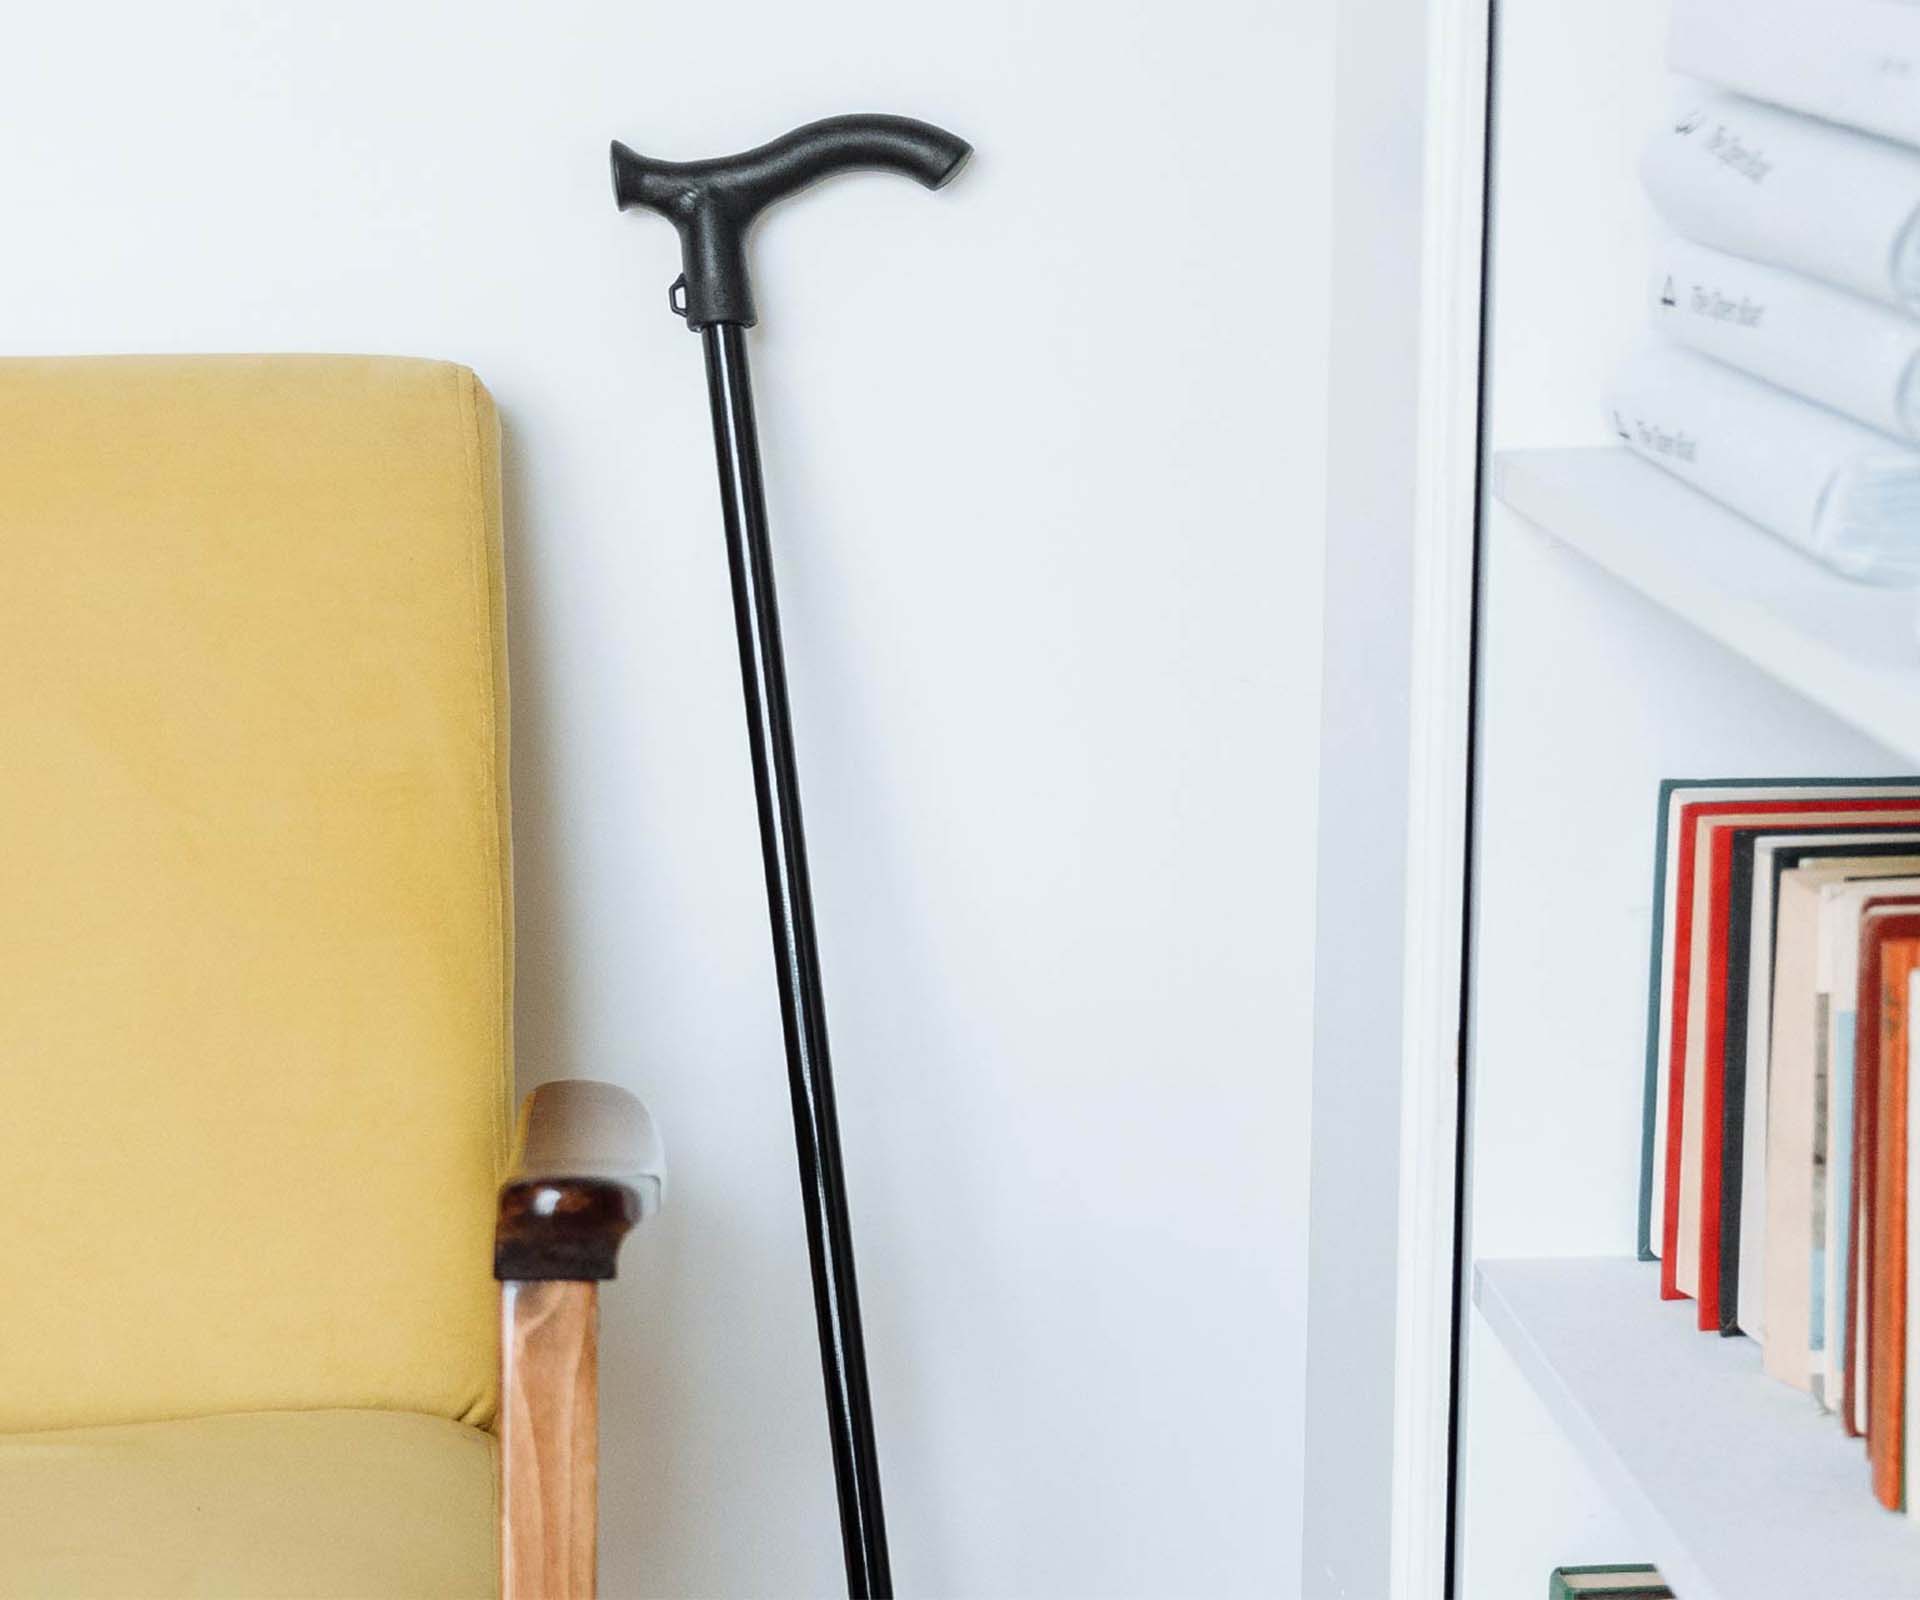 A cane leaning against a wall in a living room